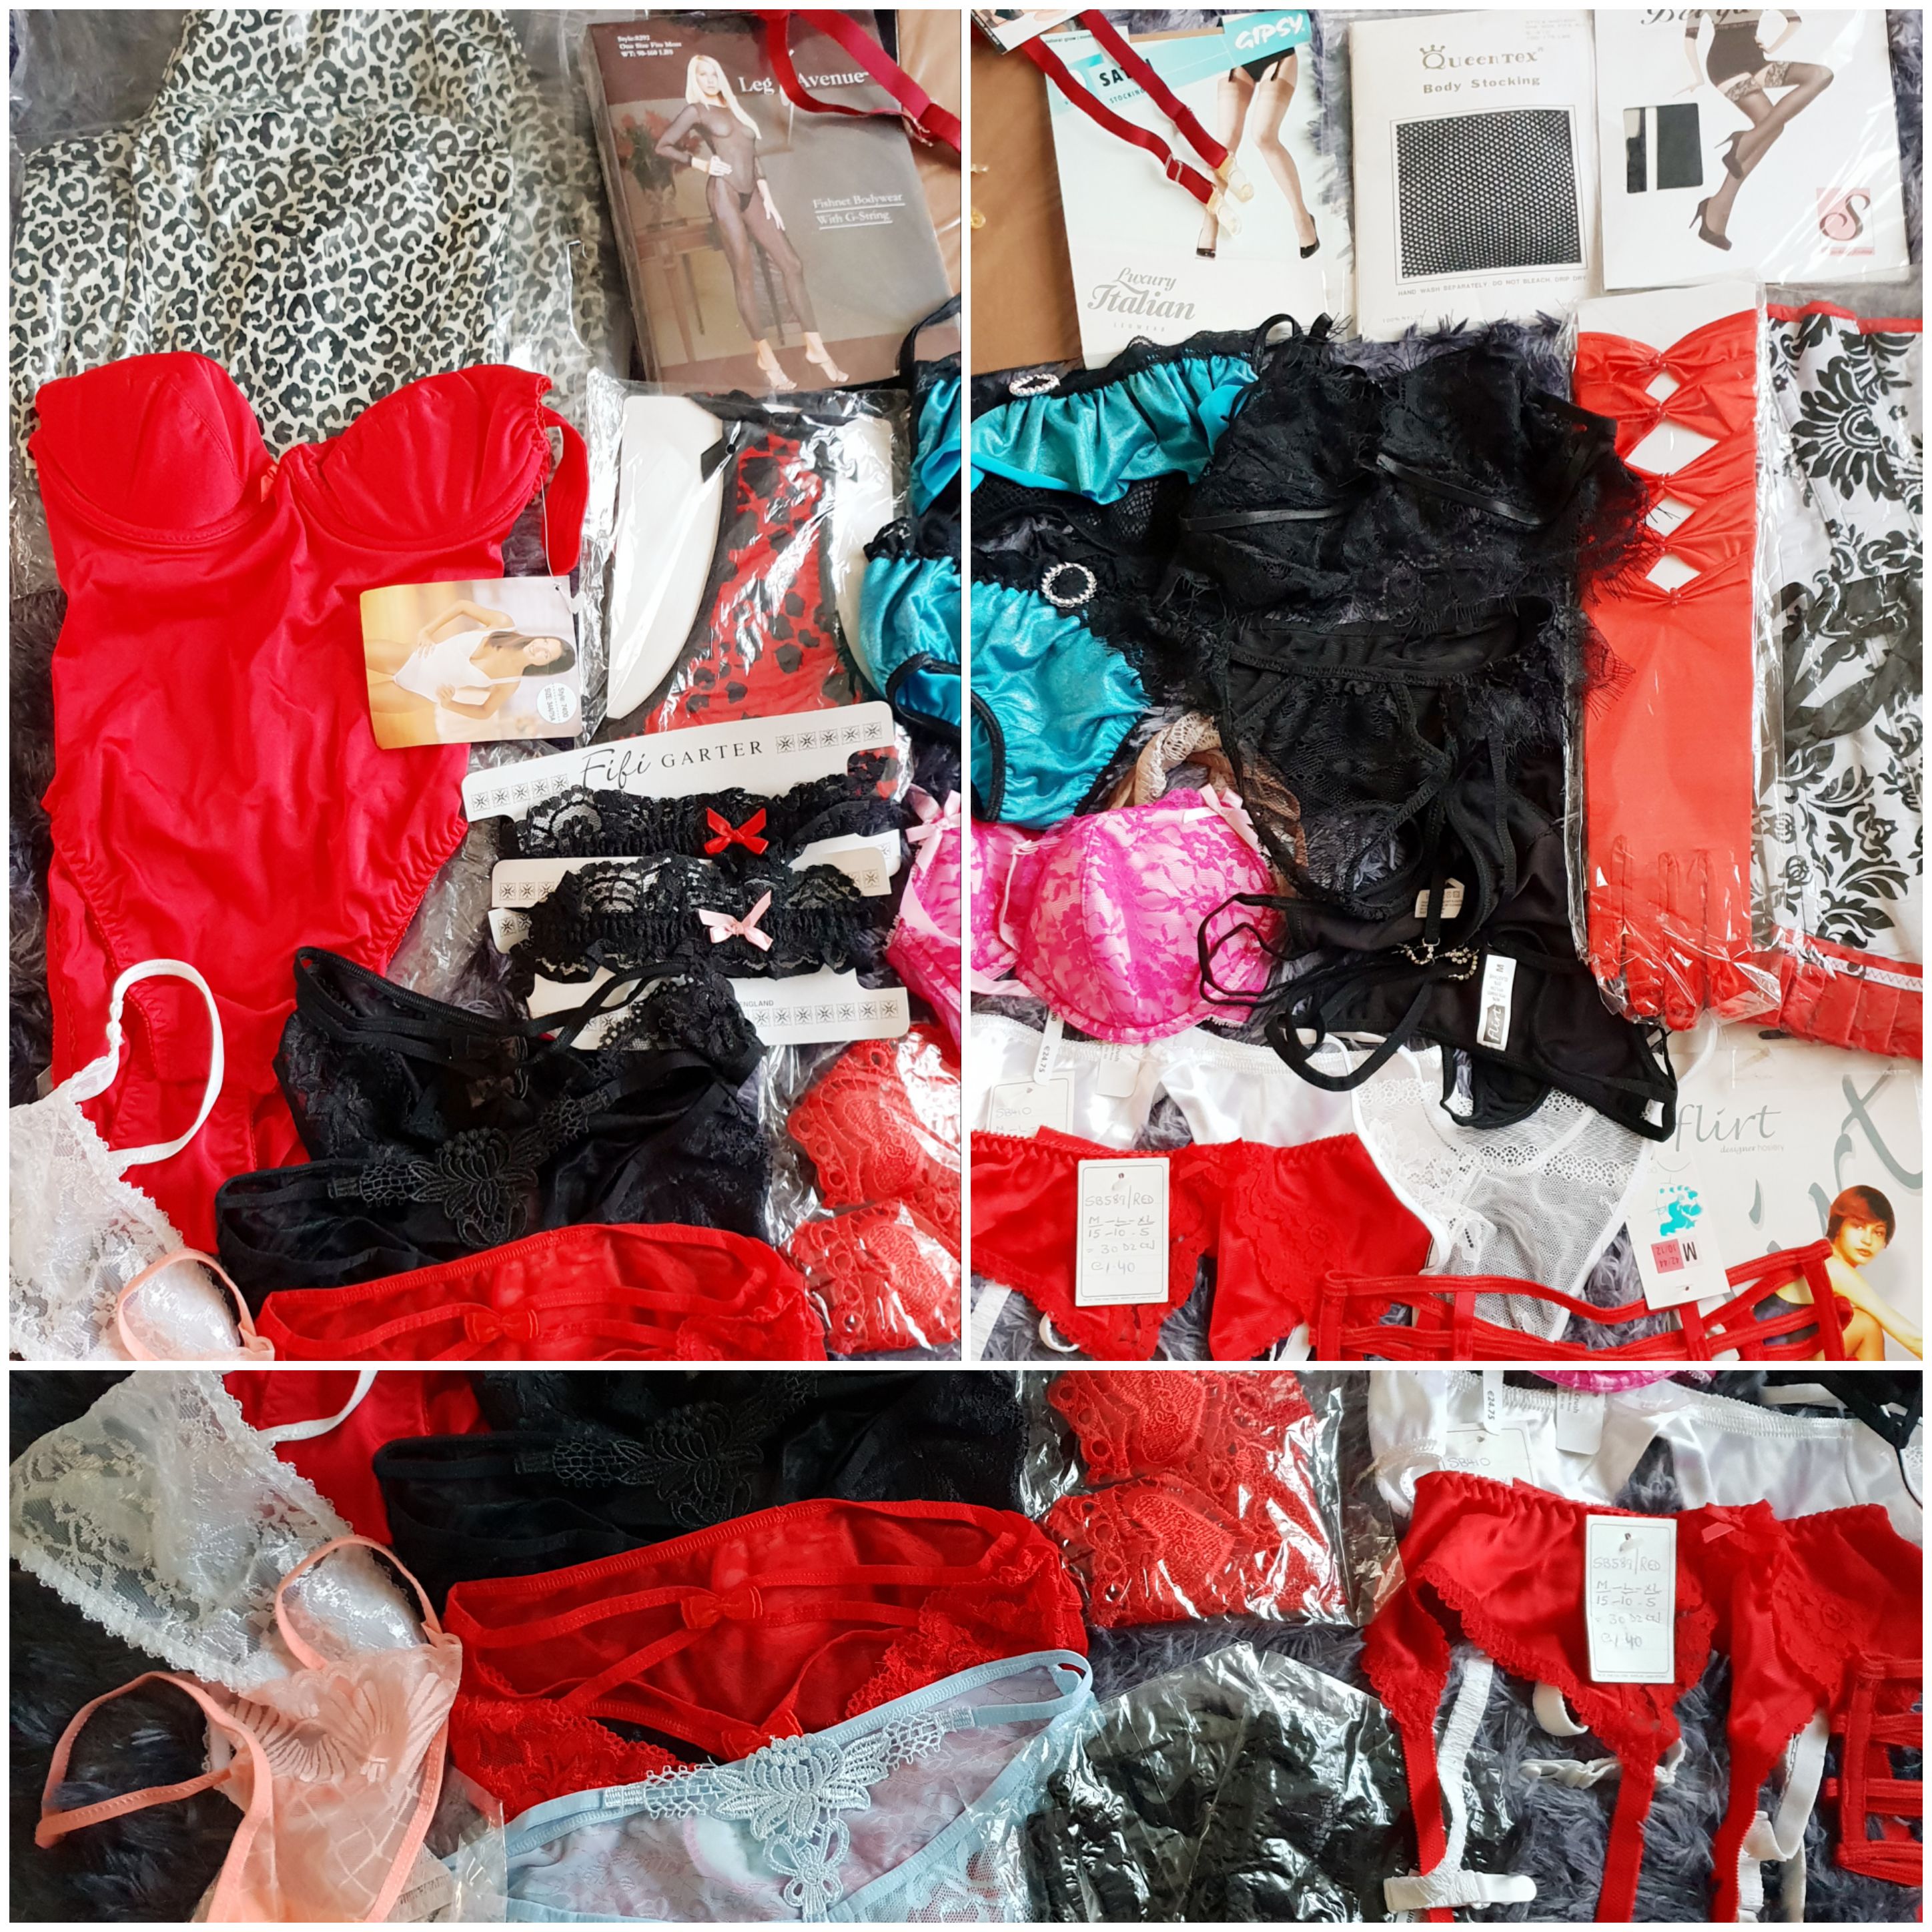 Exotic Lingerie (2) Lot of 40 items / sets lingerie, hosiery & accessories